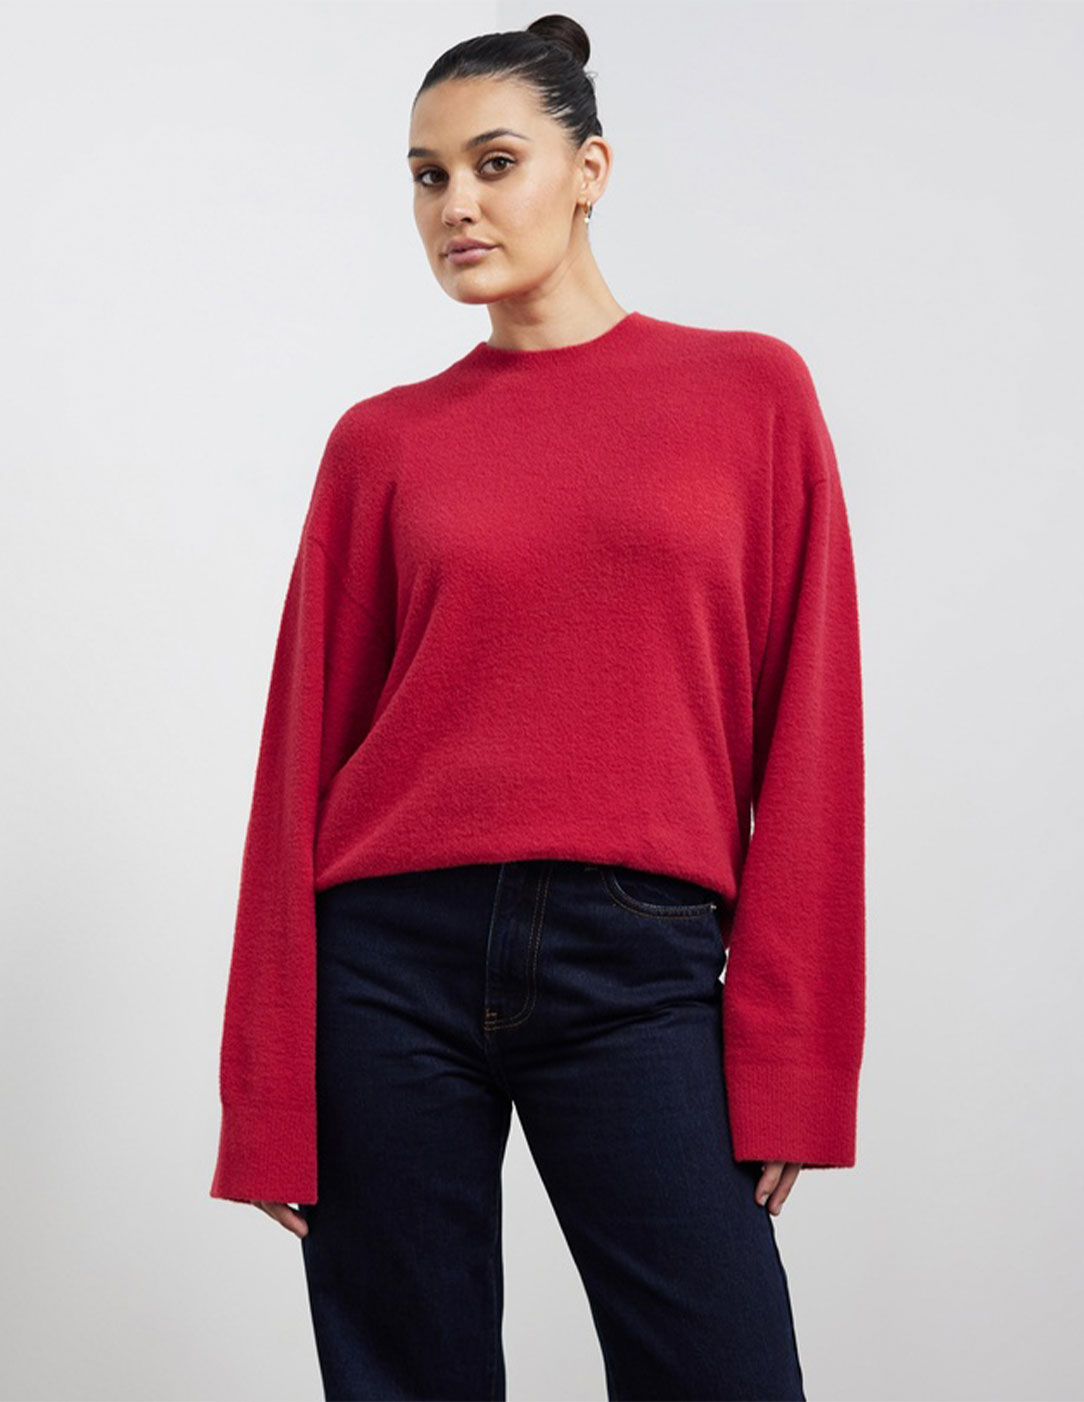 All Of These Great Oversized Jumpers Are Currently On Sale | URBAN LIST ...